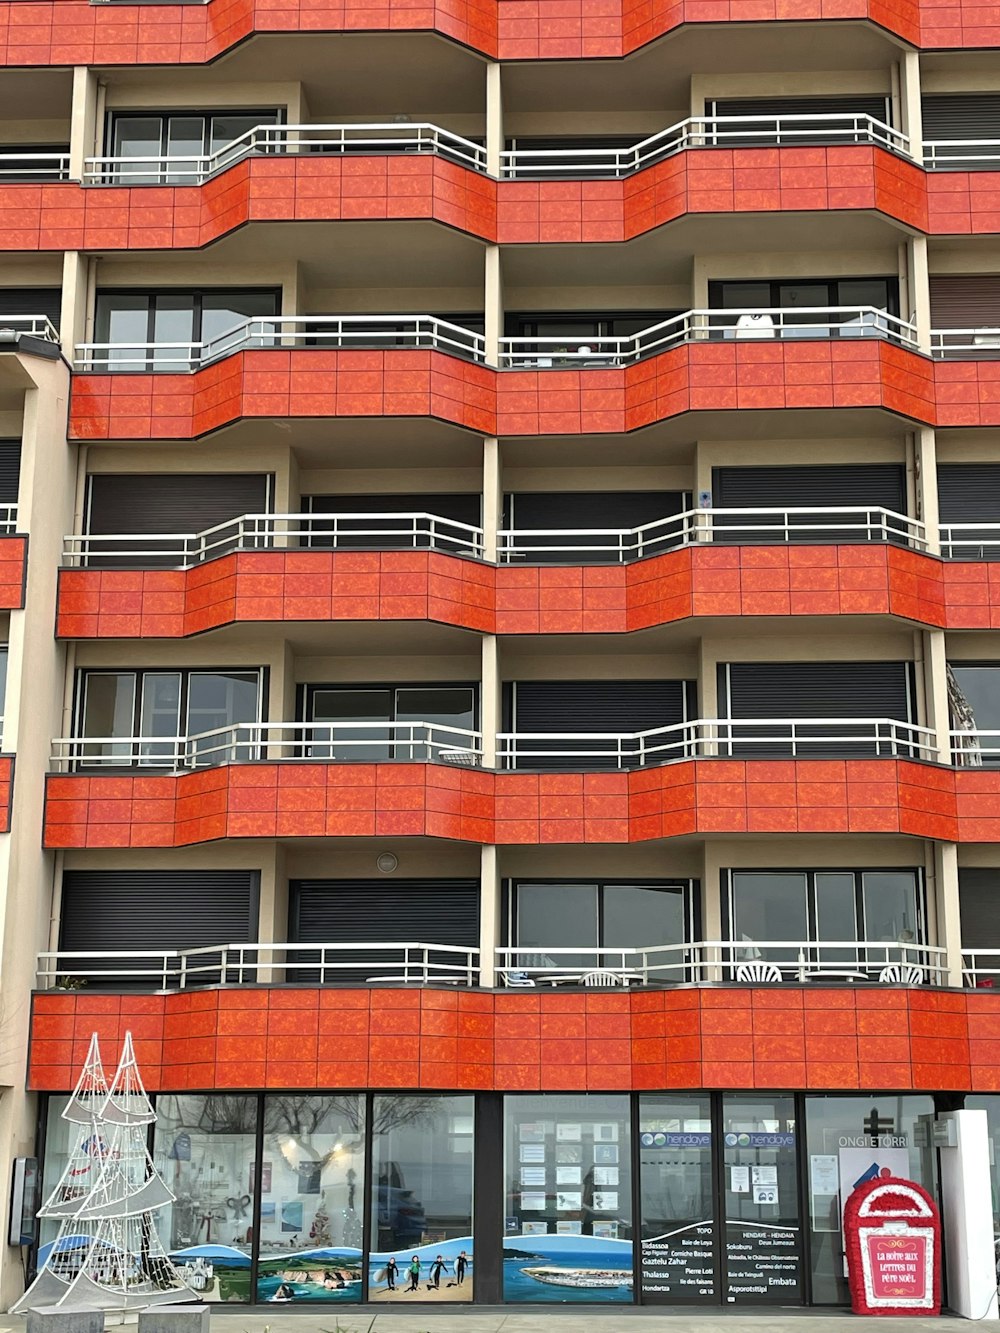 a tall orange building with balconies and balconies